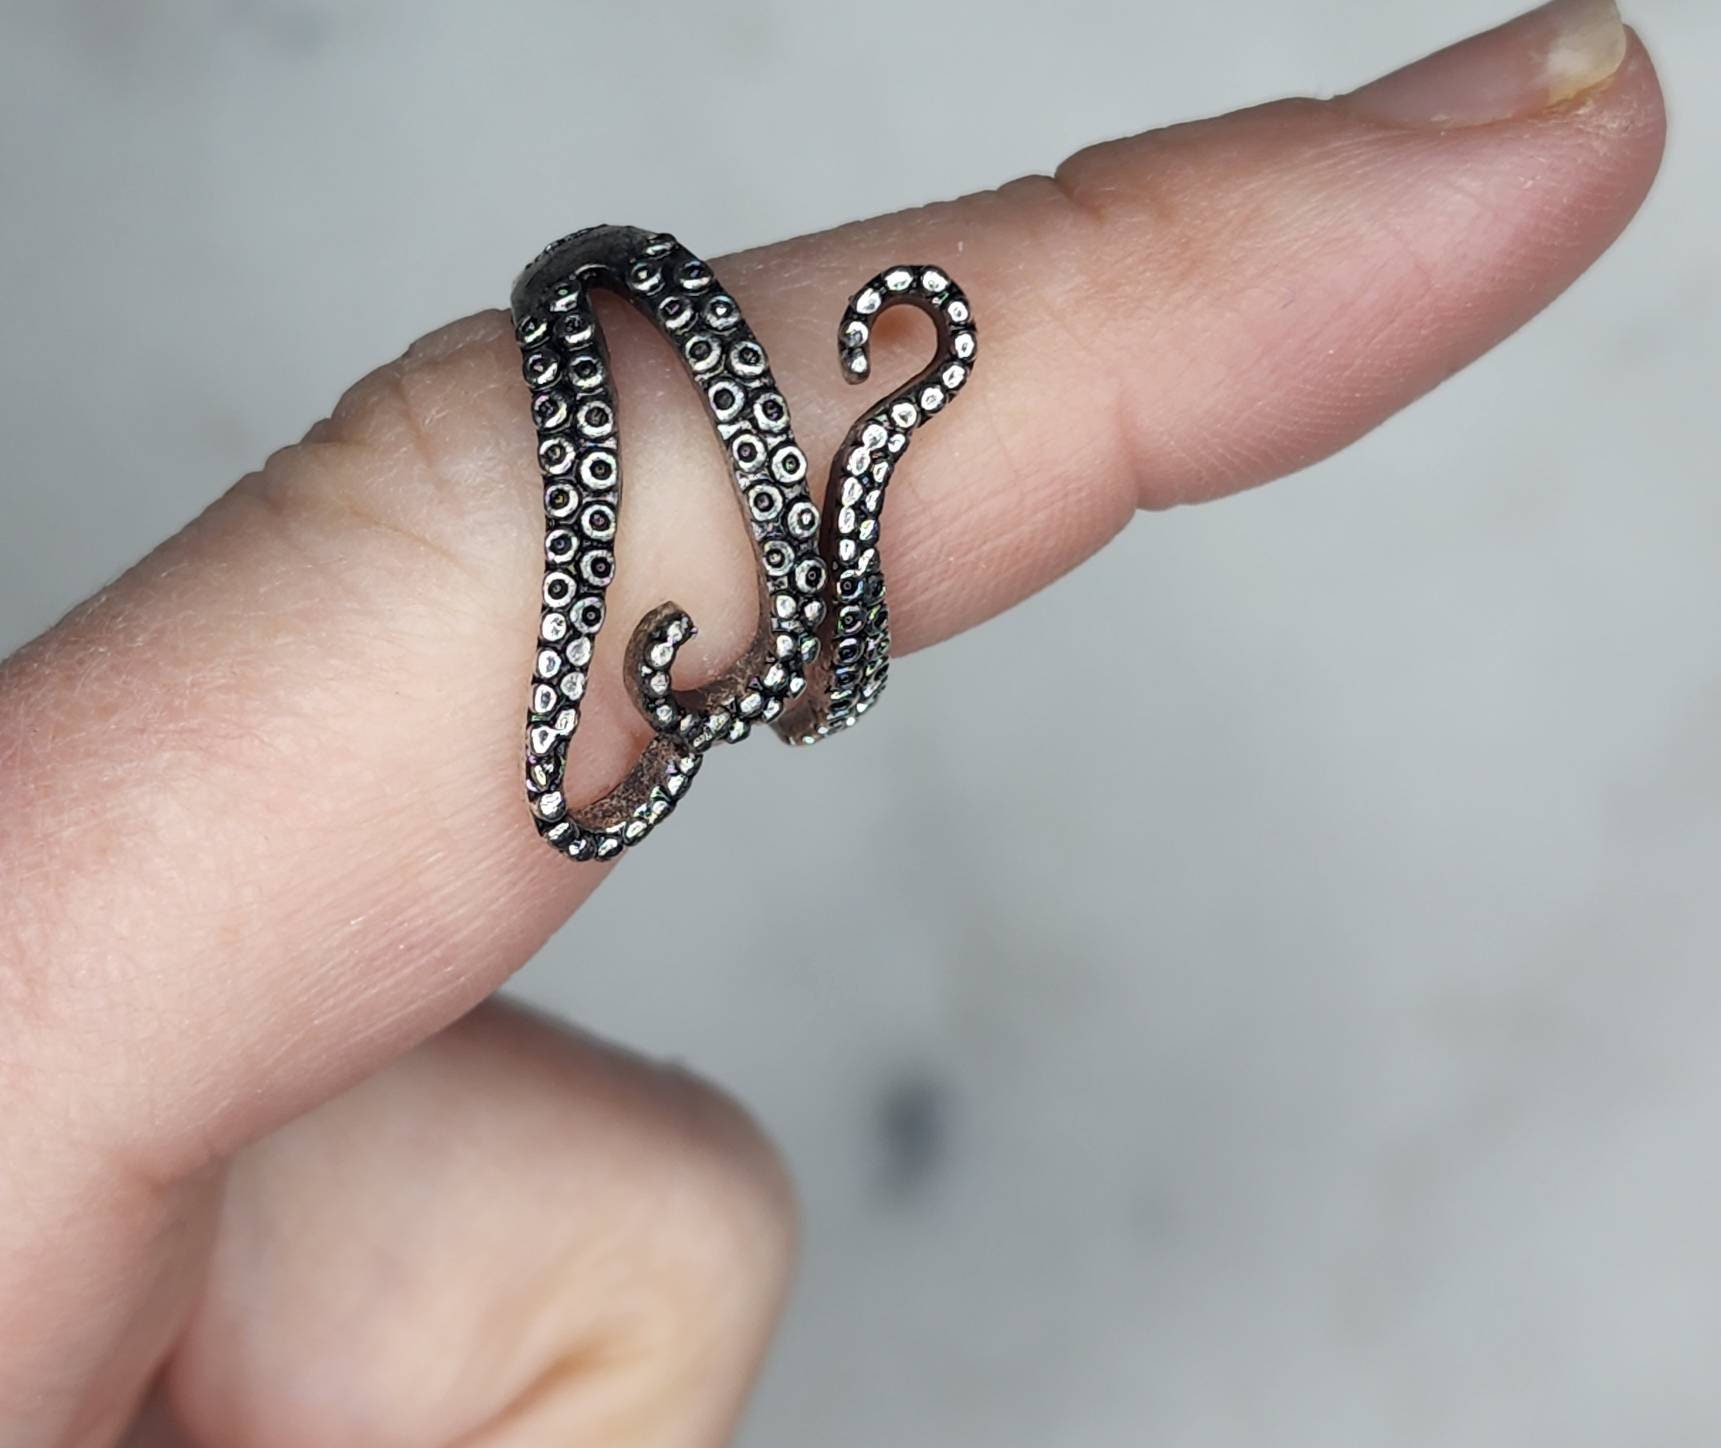 Adjustable Knitting Crochet Ring Silver-plated Fish Shape Braided agreeable